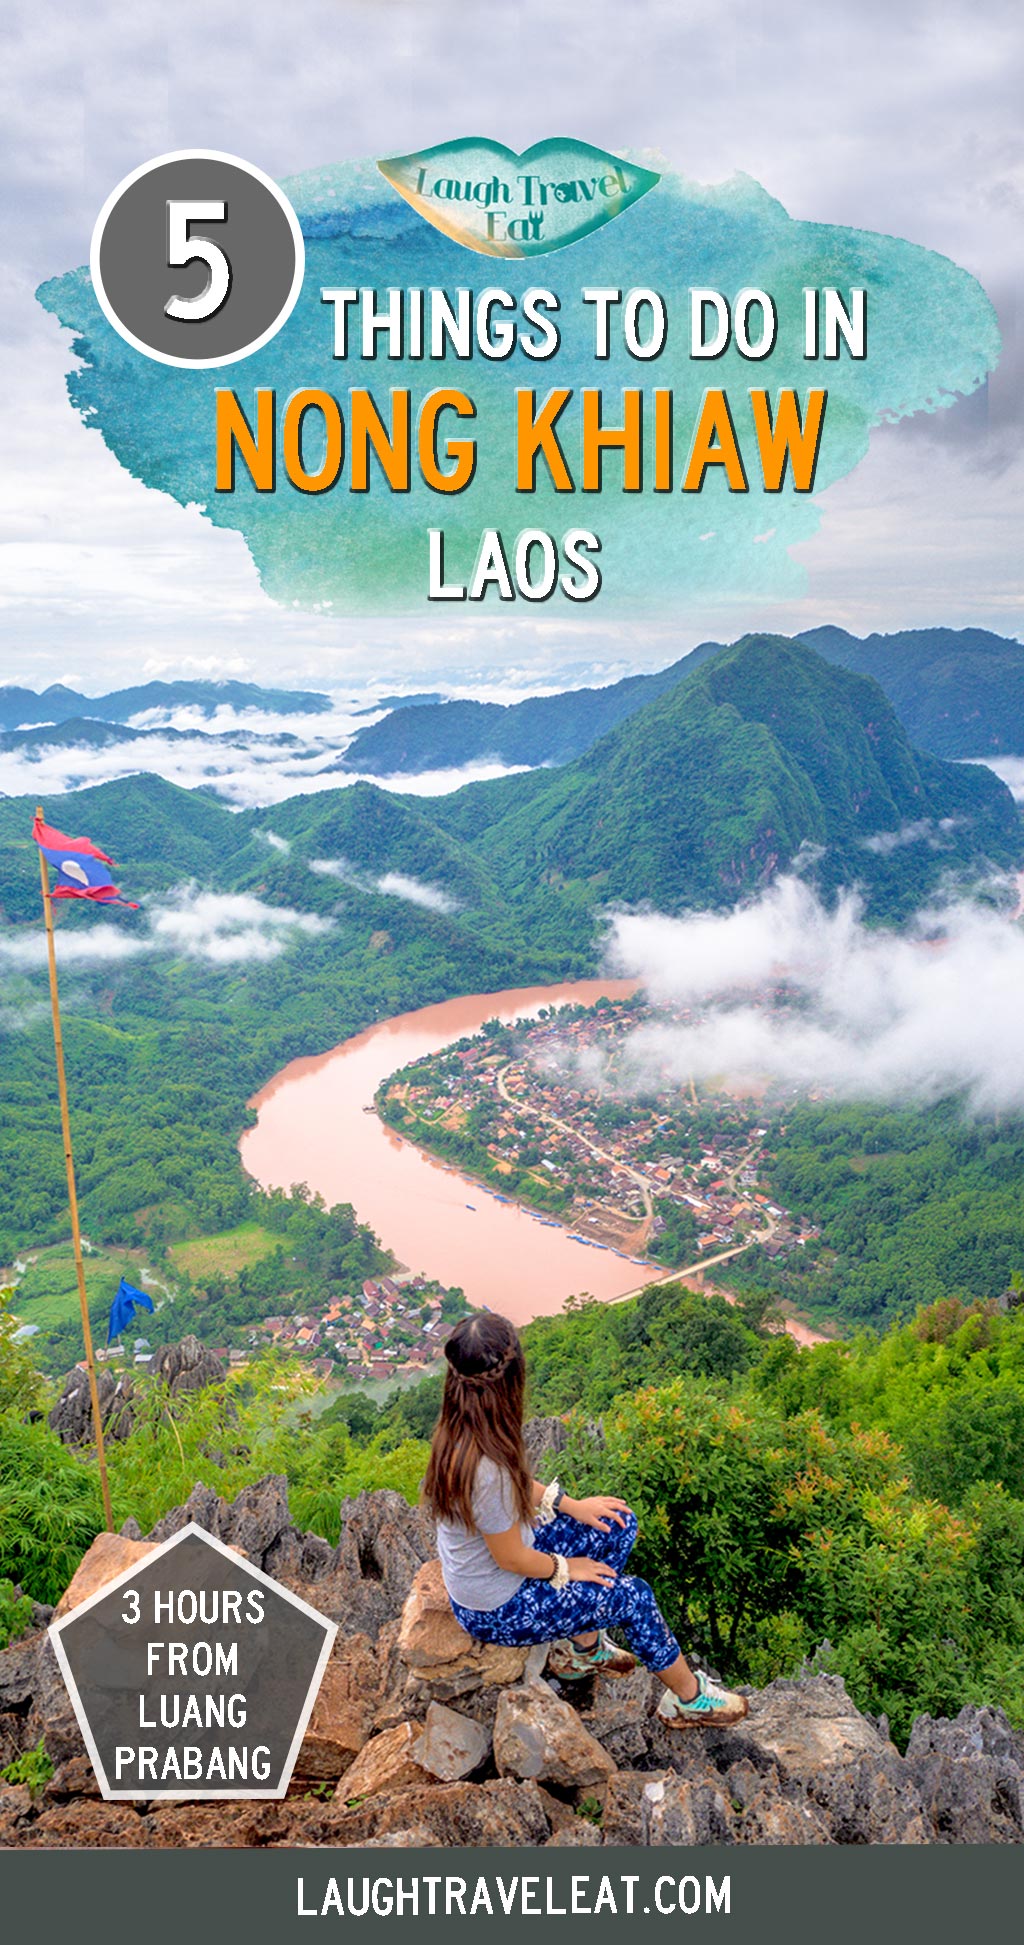 Nong Khiaw is a charming village 3 hours north of Luang Prabang. With great hikes, ethnic village, and more, here's my top 5 things to do: #nongkhiaw #laos #luangprabang